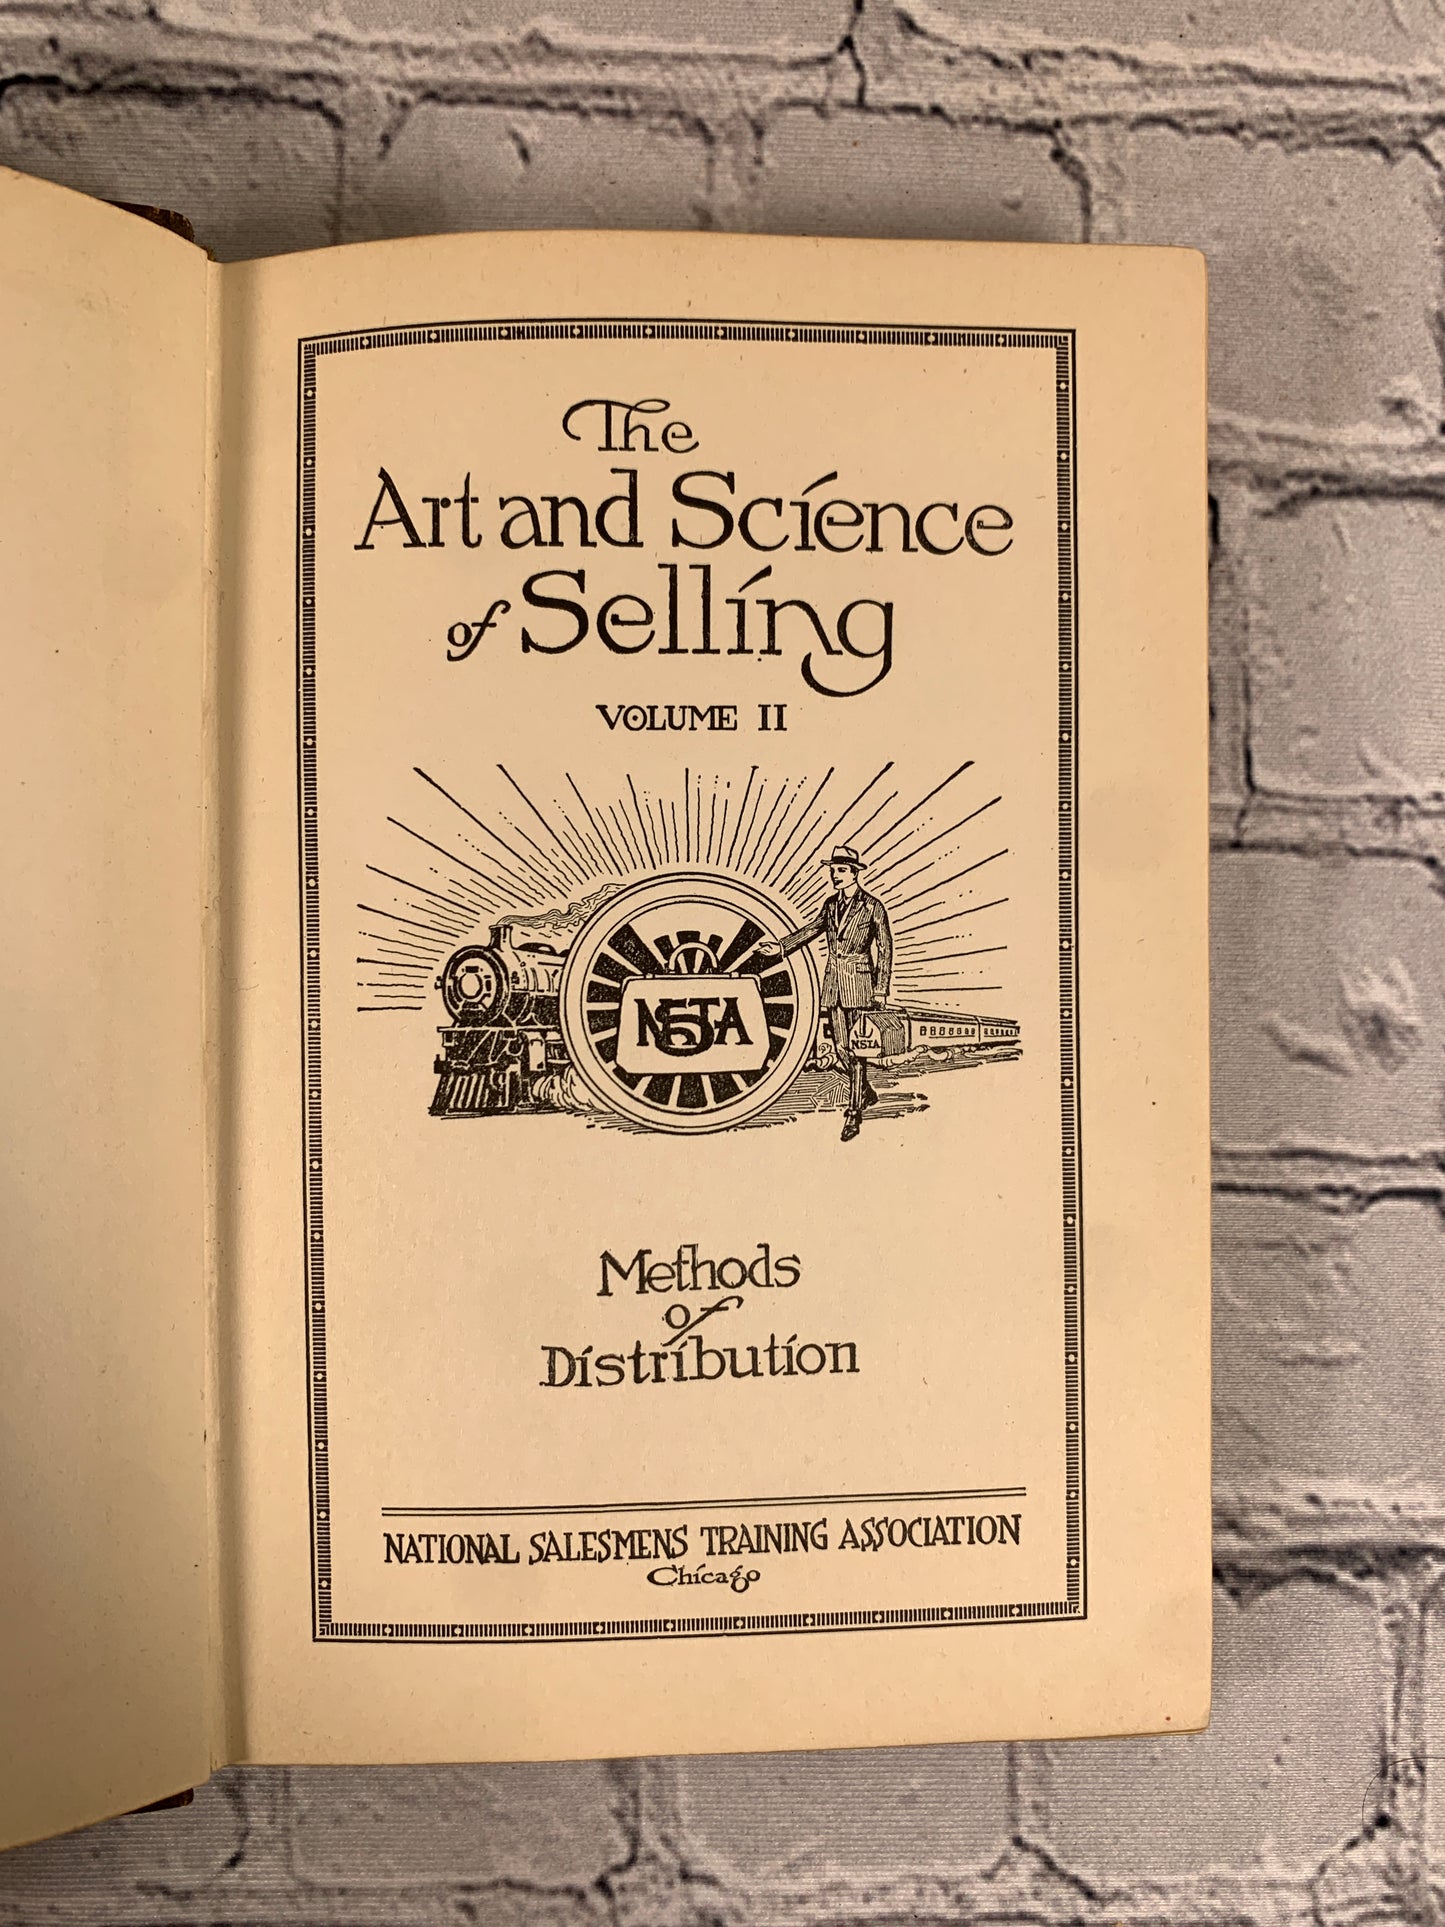 The Art and Science of Selling by The National Salesman Training Association [1922]